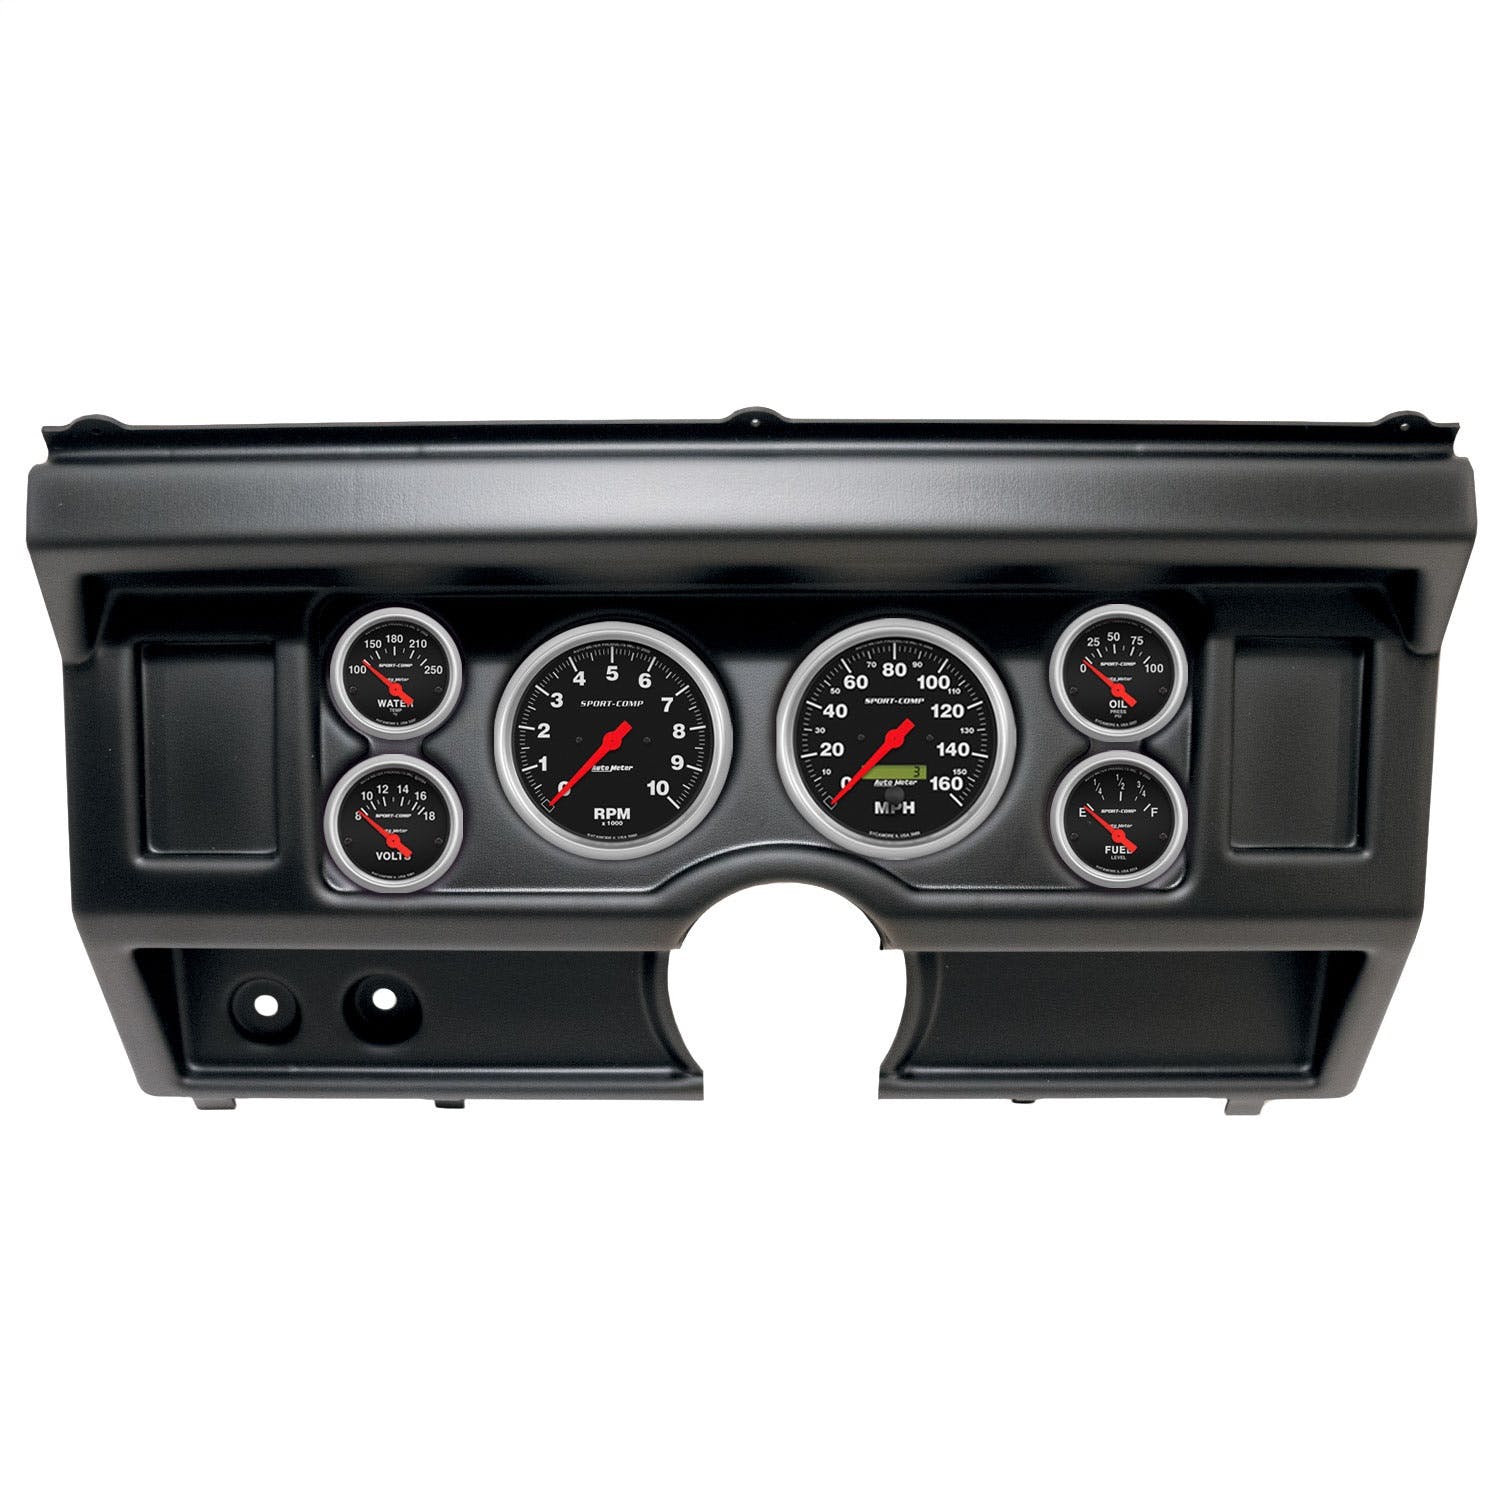 AutoMeter Products 2918-11 6 Gauge Direct-Fit Dash Kit, Ford Truck No Ac 80-86, Sport-Comp